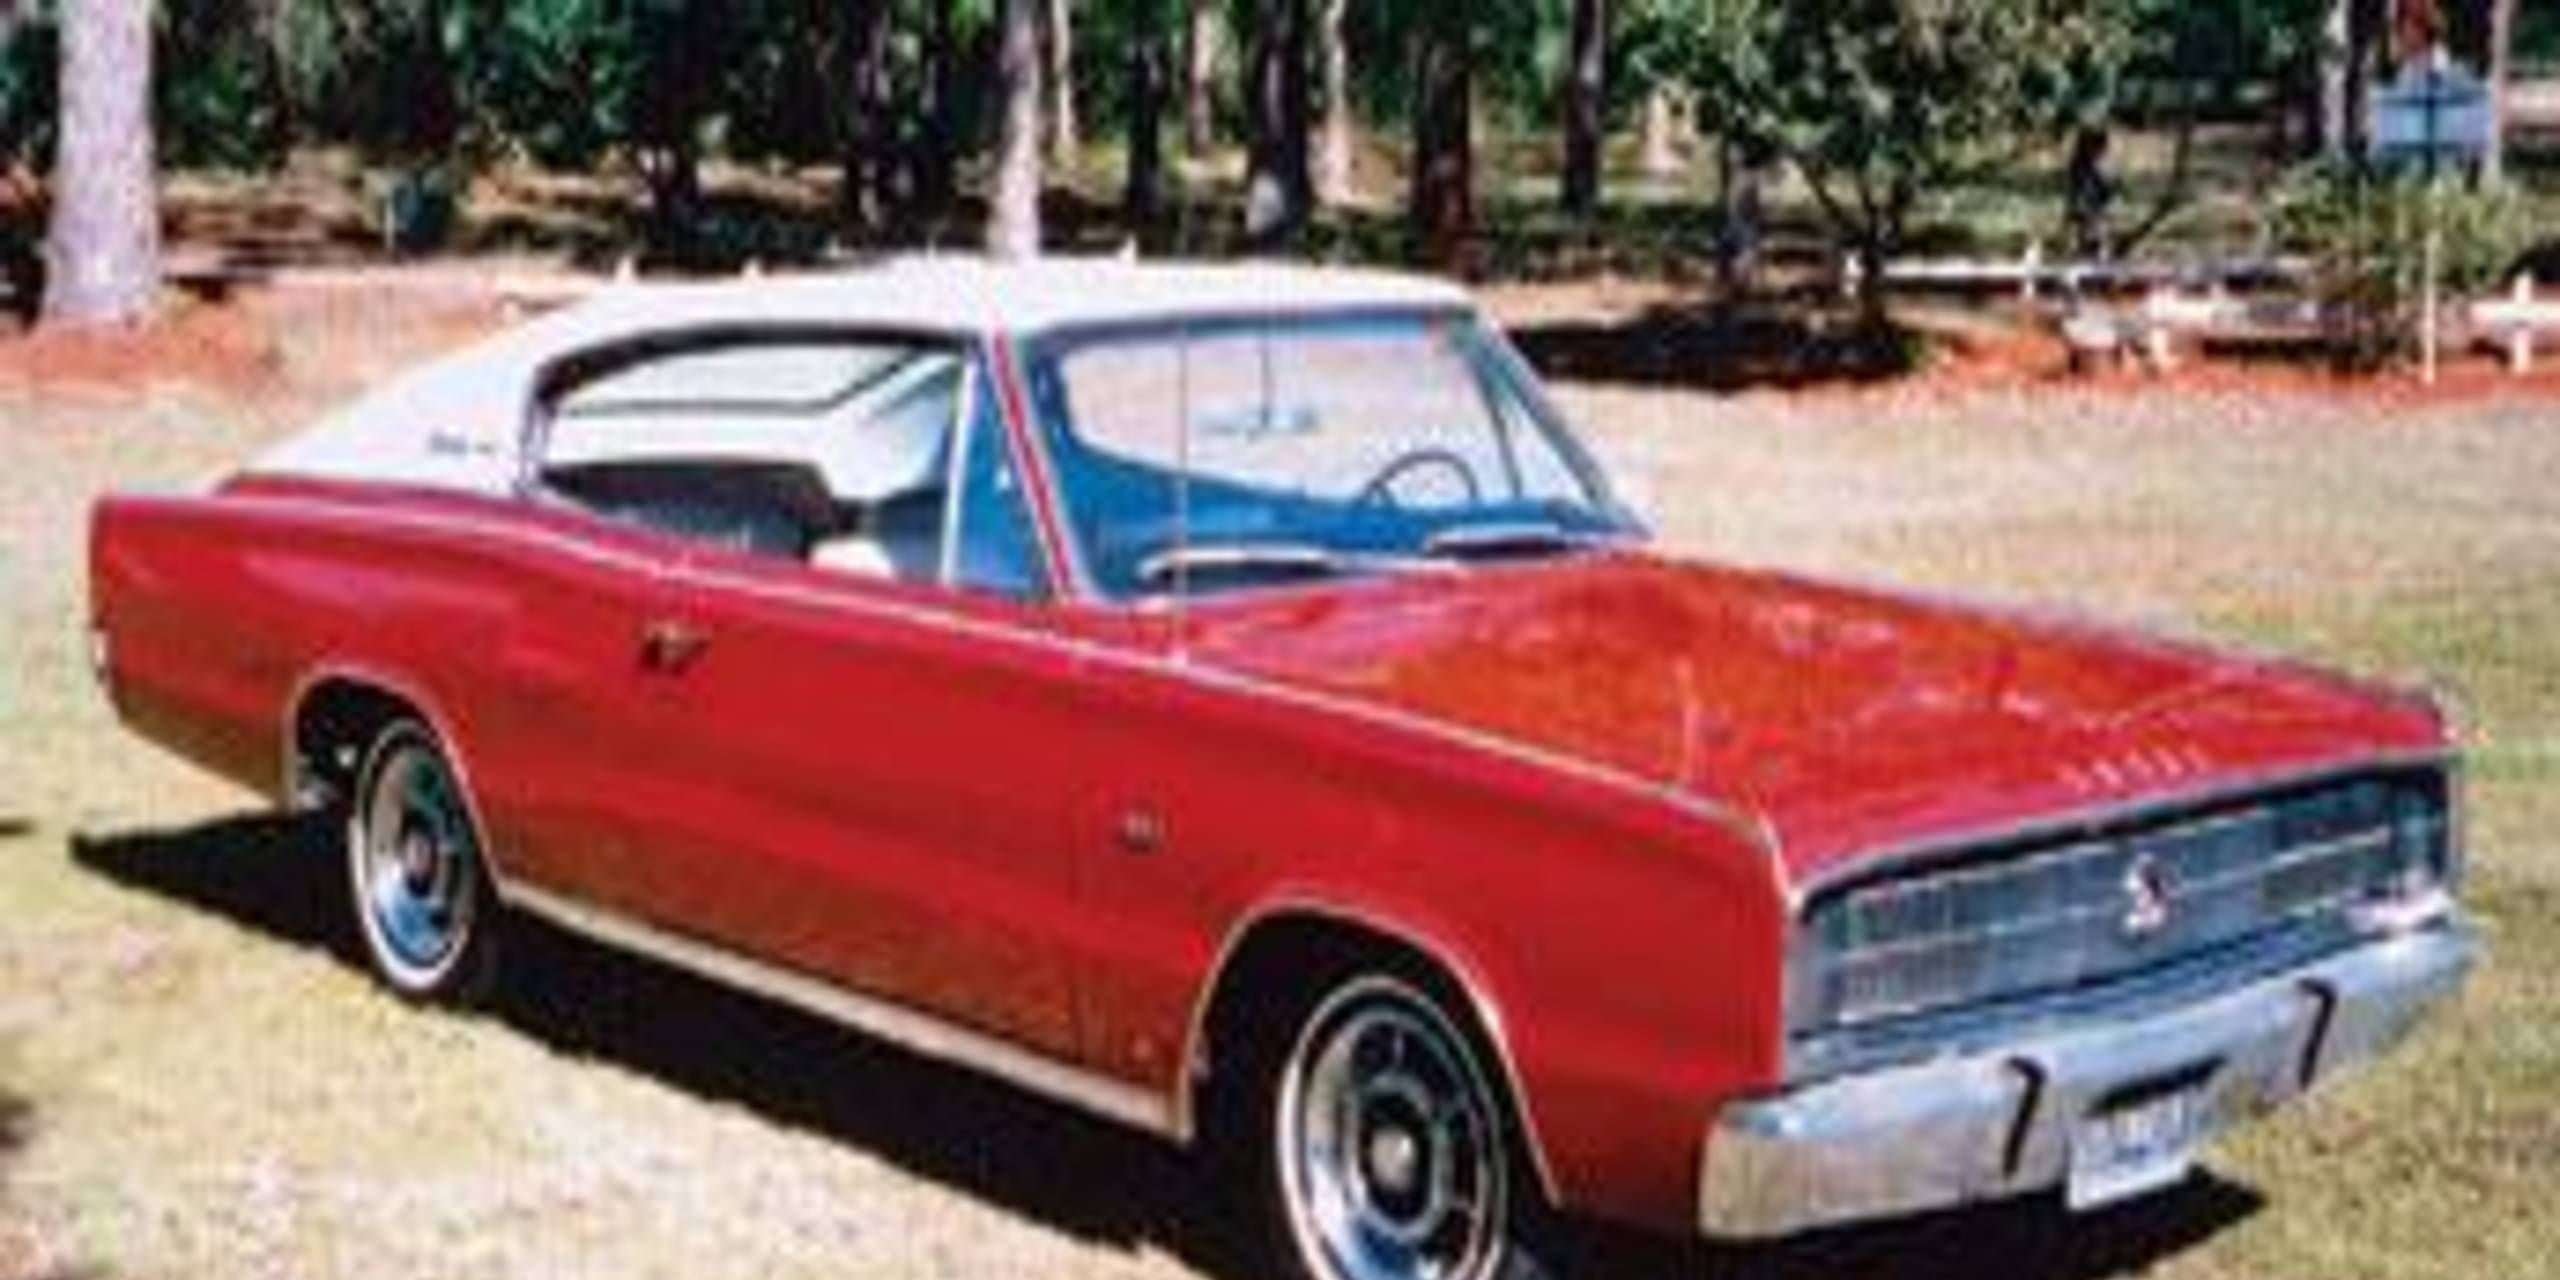 1966 dodge charger convertible